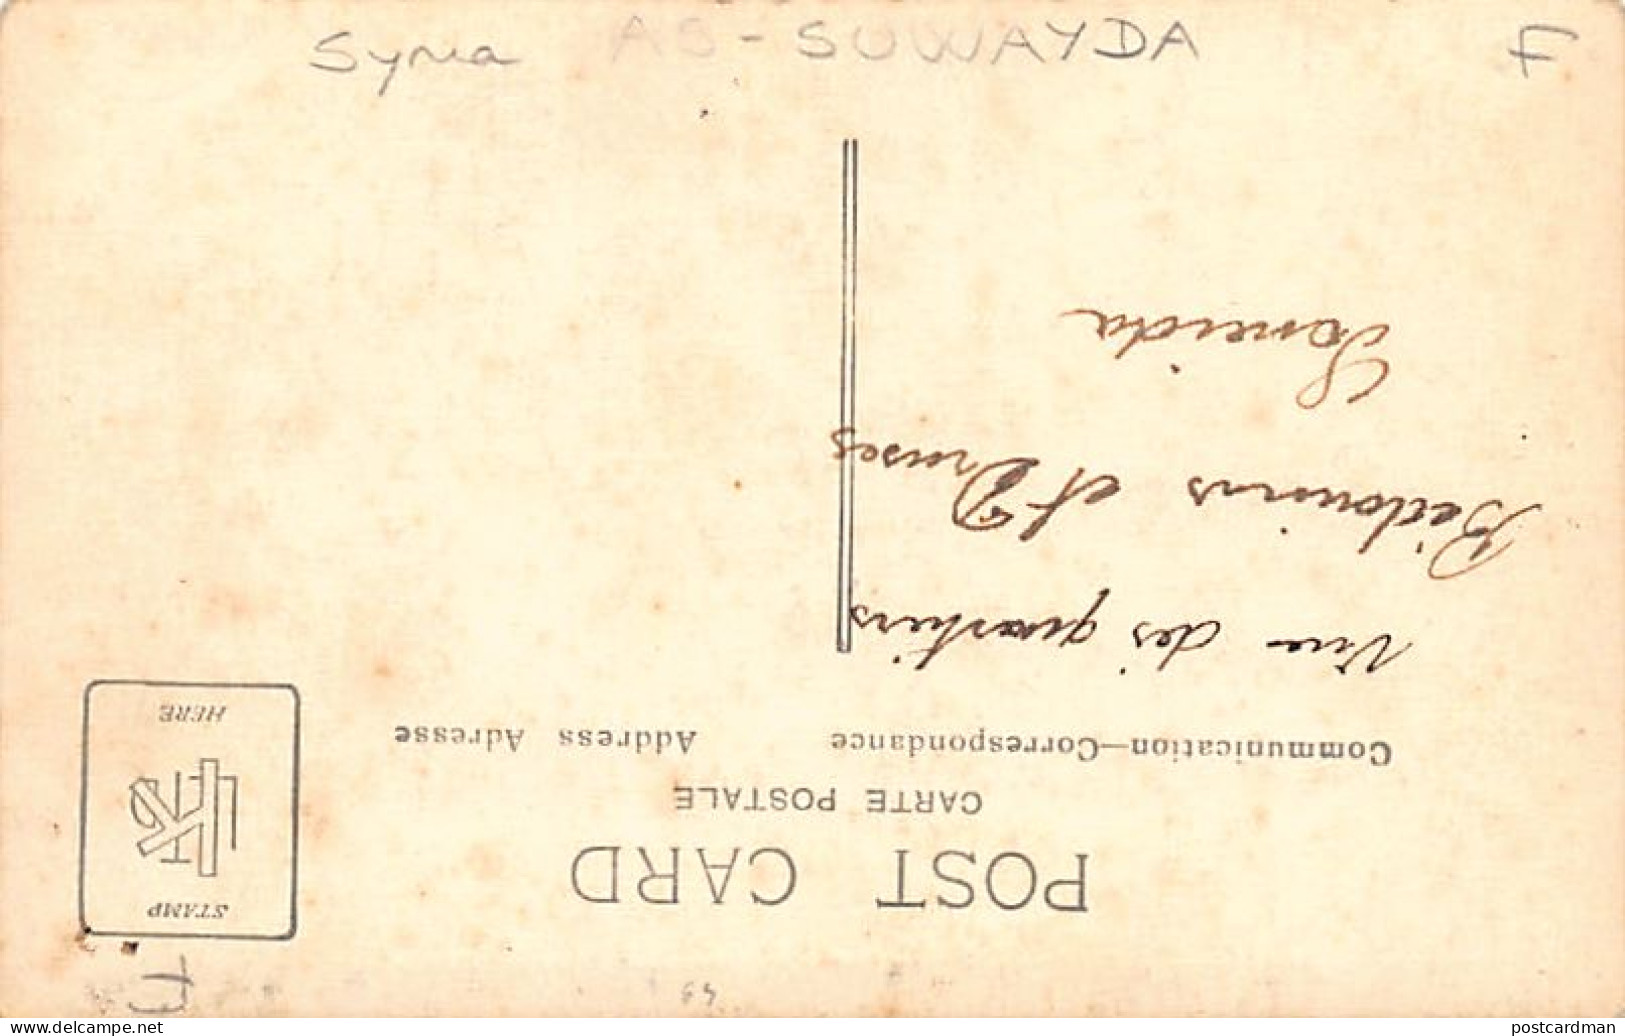 Syria - DAMASCUS - Litho Postcard - Publ. A. Piltz - SEE STAMP AND POSTMARK. - Syrie